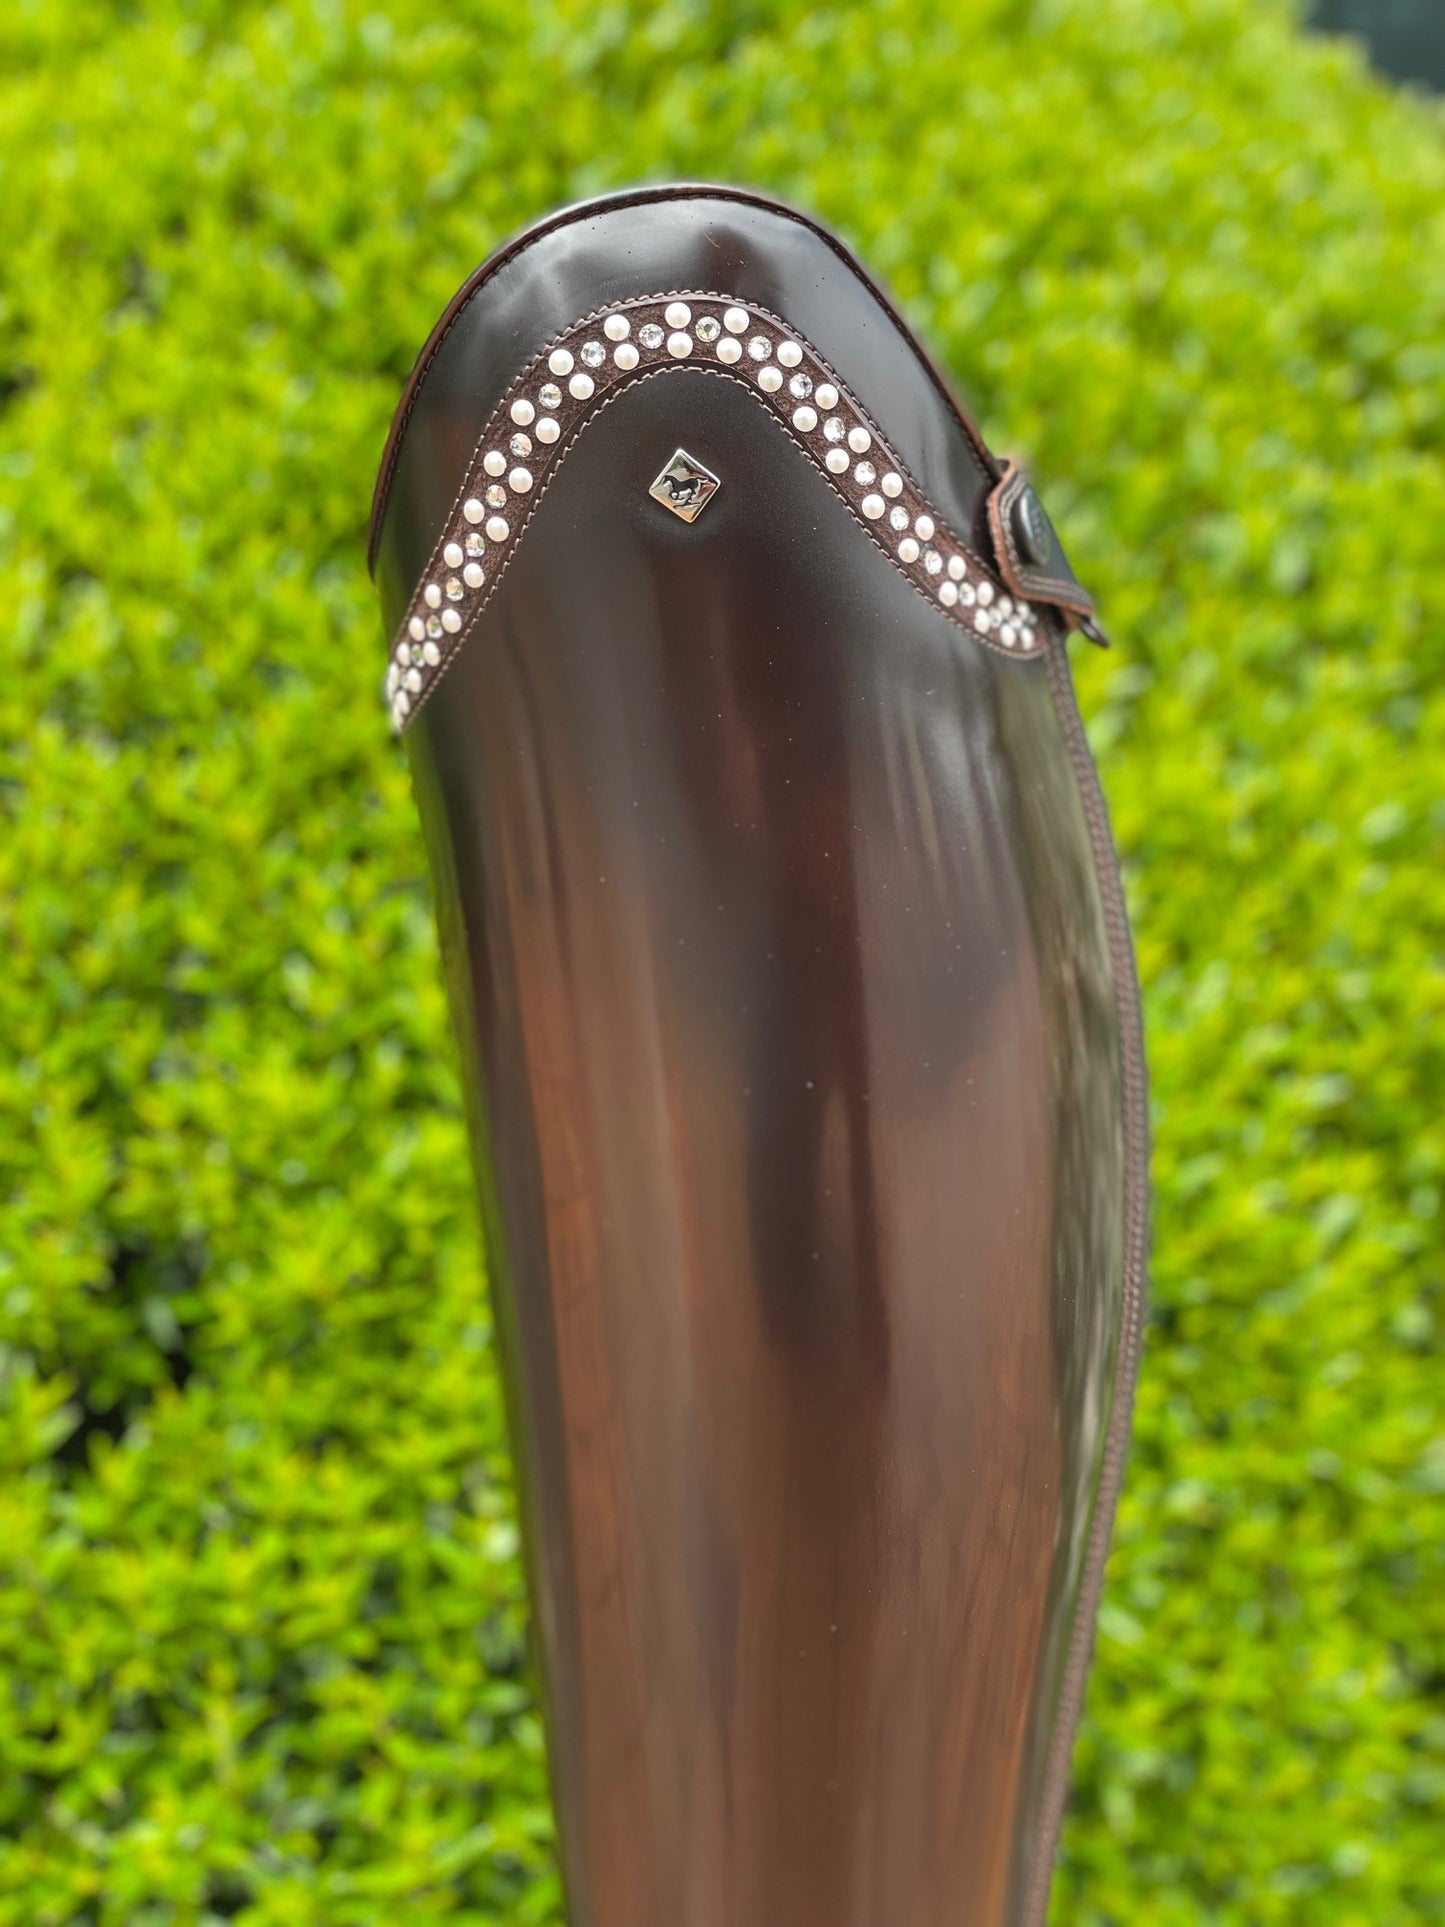 DENIRO S2601 DRESSAGE TALL BOOT - BRUSH BROWN WITH PICCOLO TOP